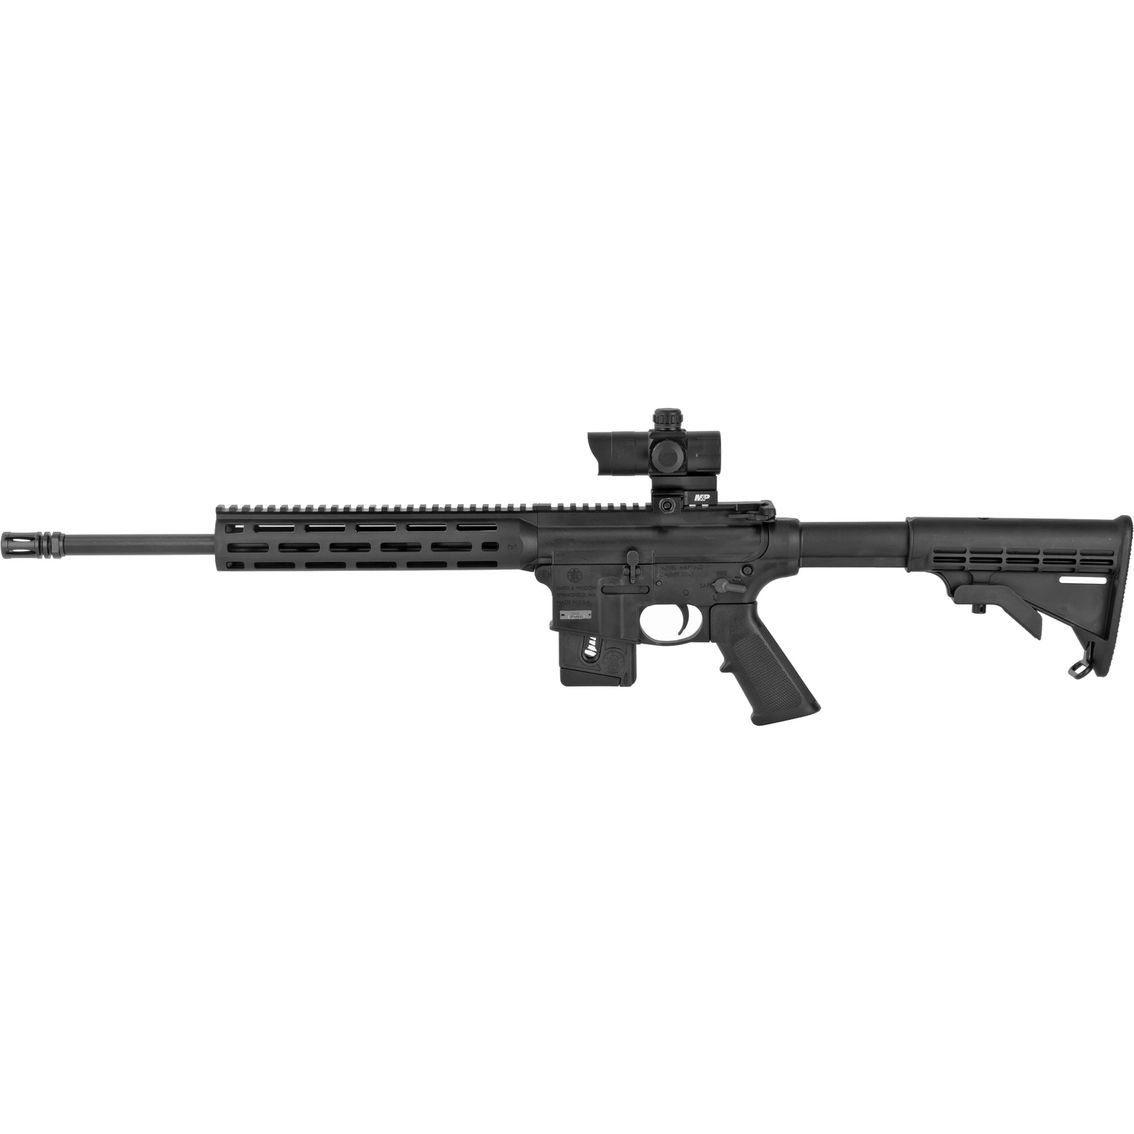 Smith & Wesson M&P15-22 Sport LR 16.5 in. Barrel with Red Dot Sight 10 Rds Rifle - Image 2 of 3